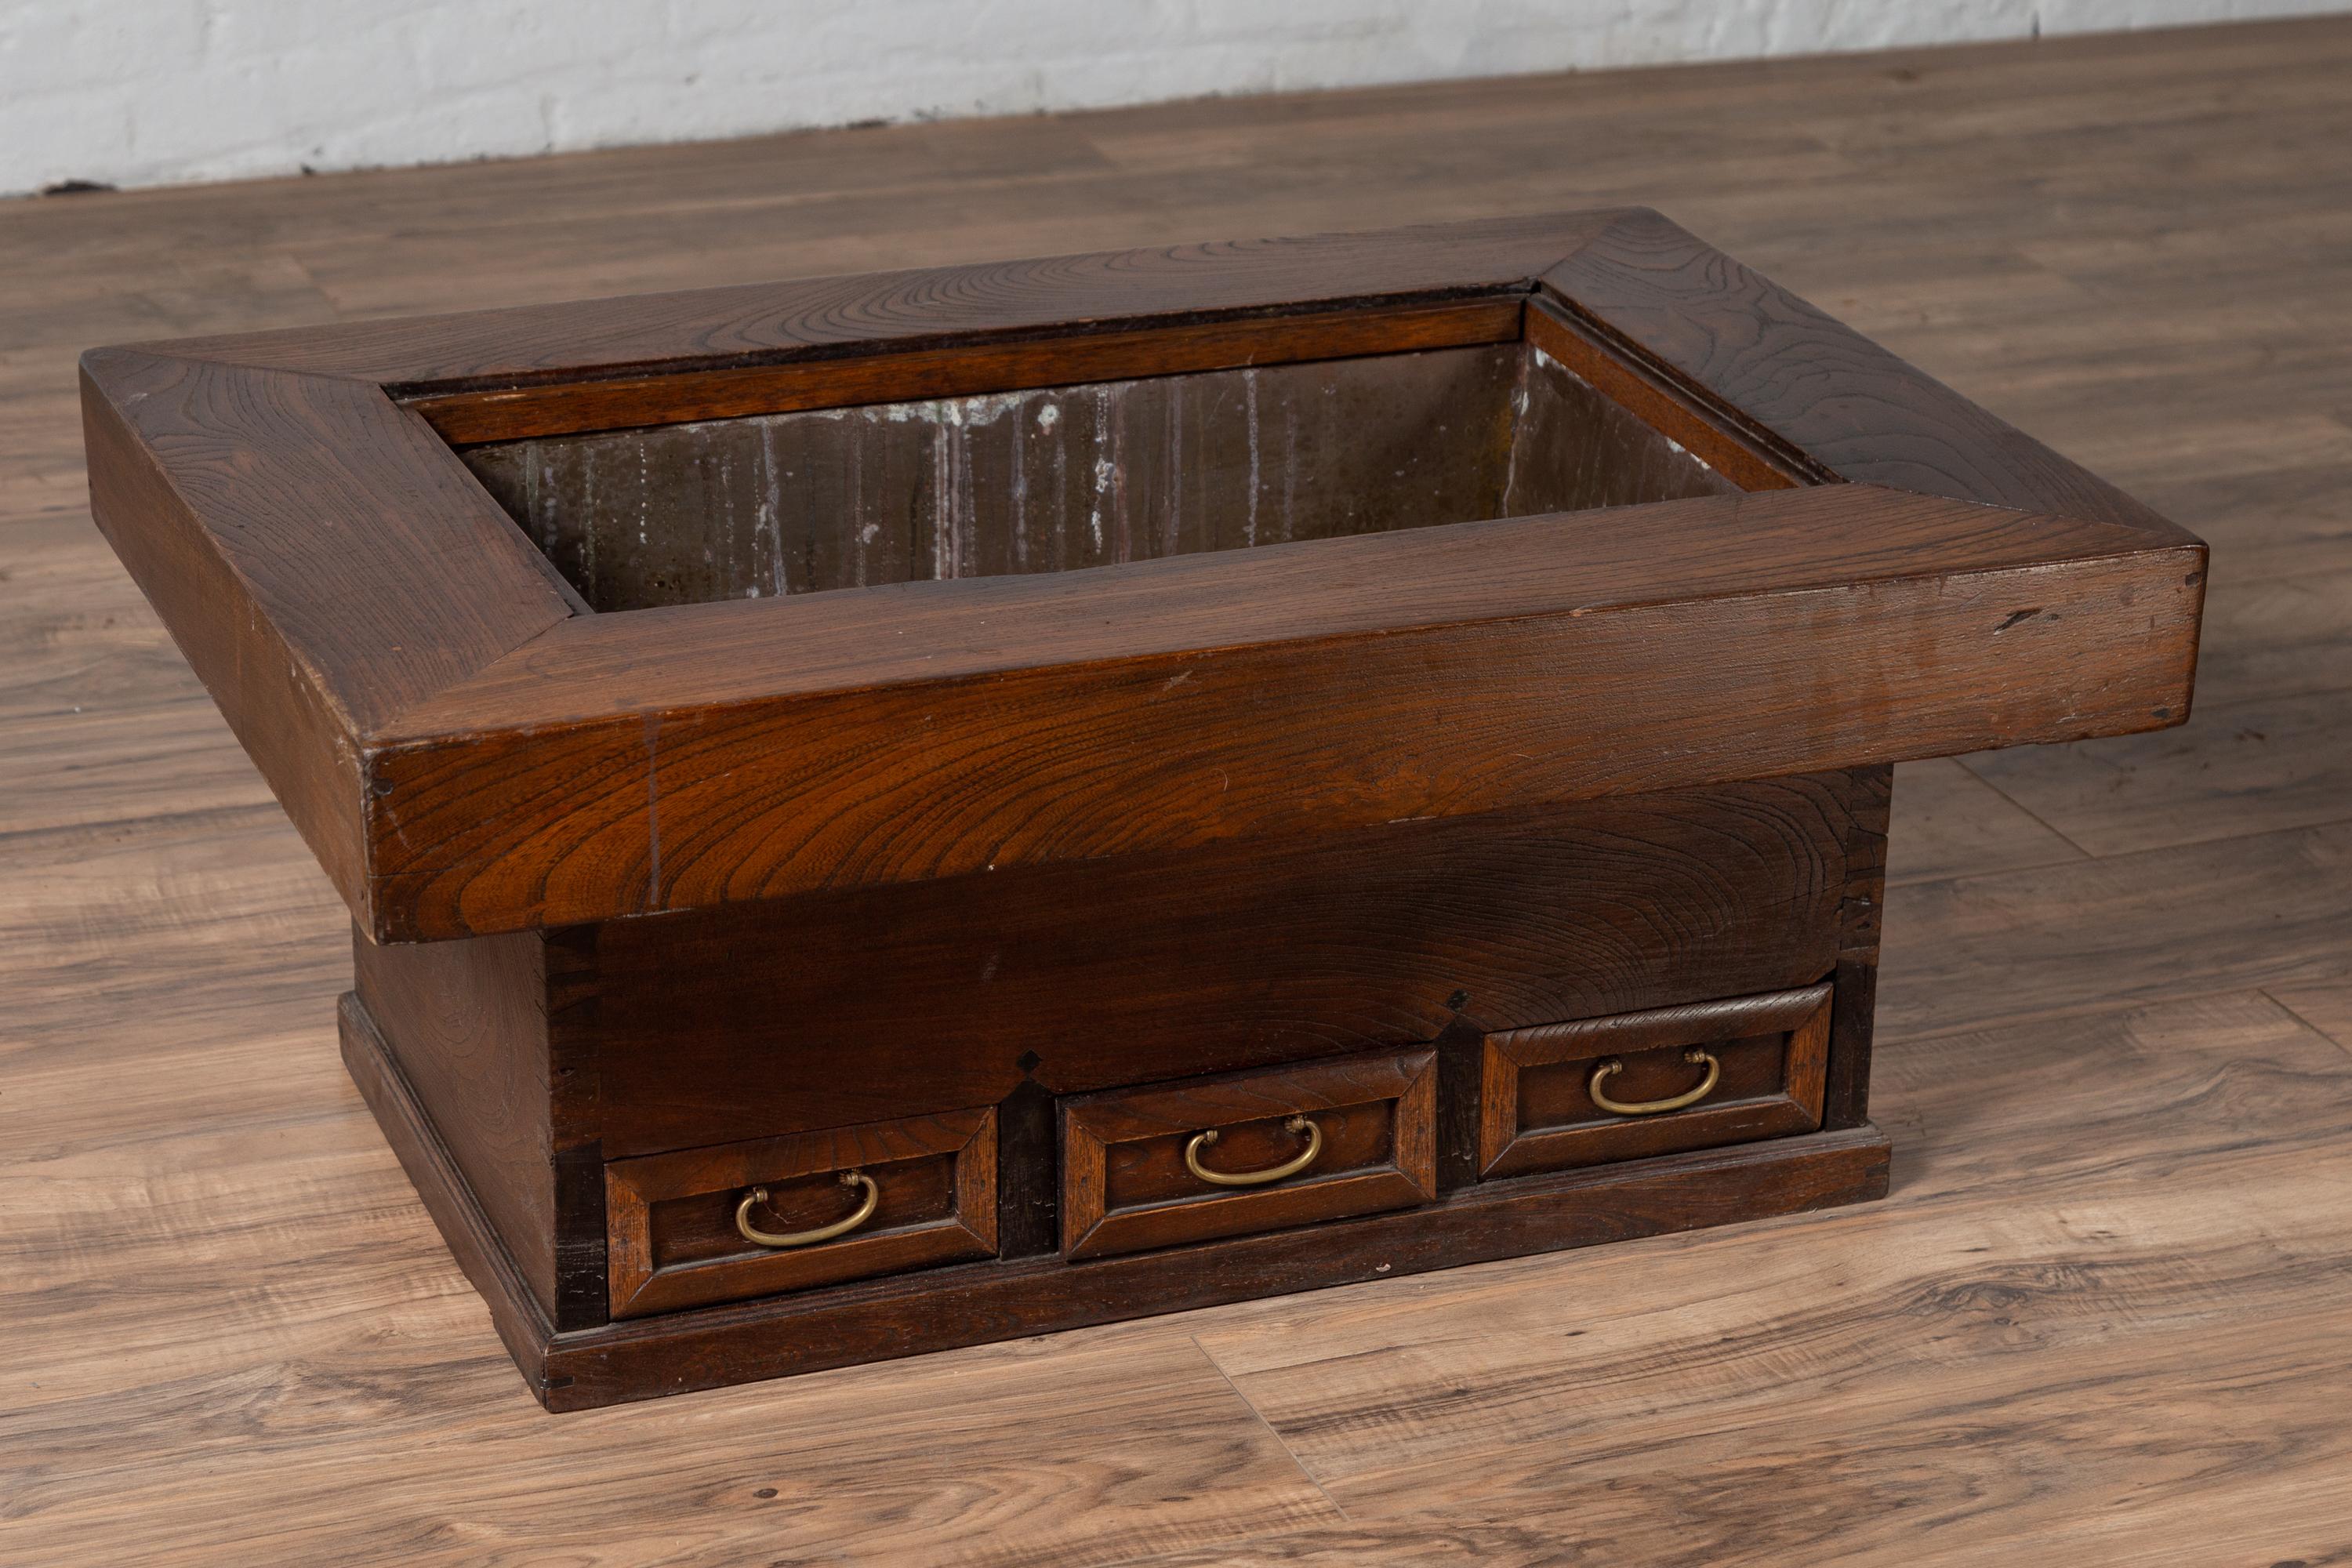 An antique Japanese rectangular wooden hibachi from the early 20th century, with metal liner and three drawers. Used for cooking or warming sake or tea, this elegant hibachi features a rectangular frame with large top surrounding a central opening